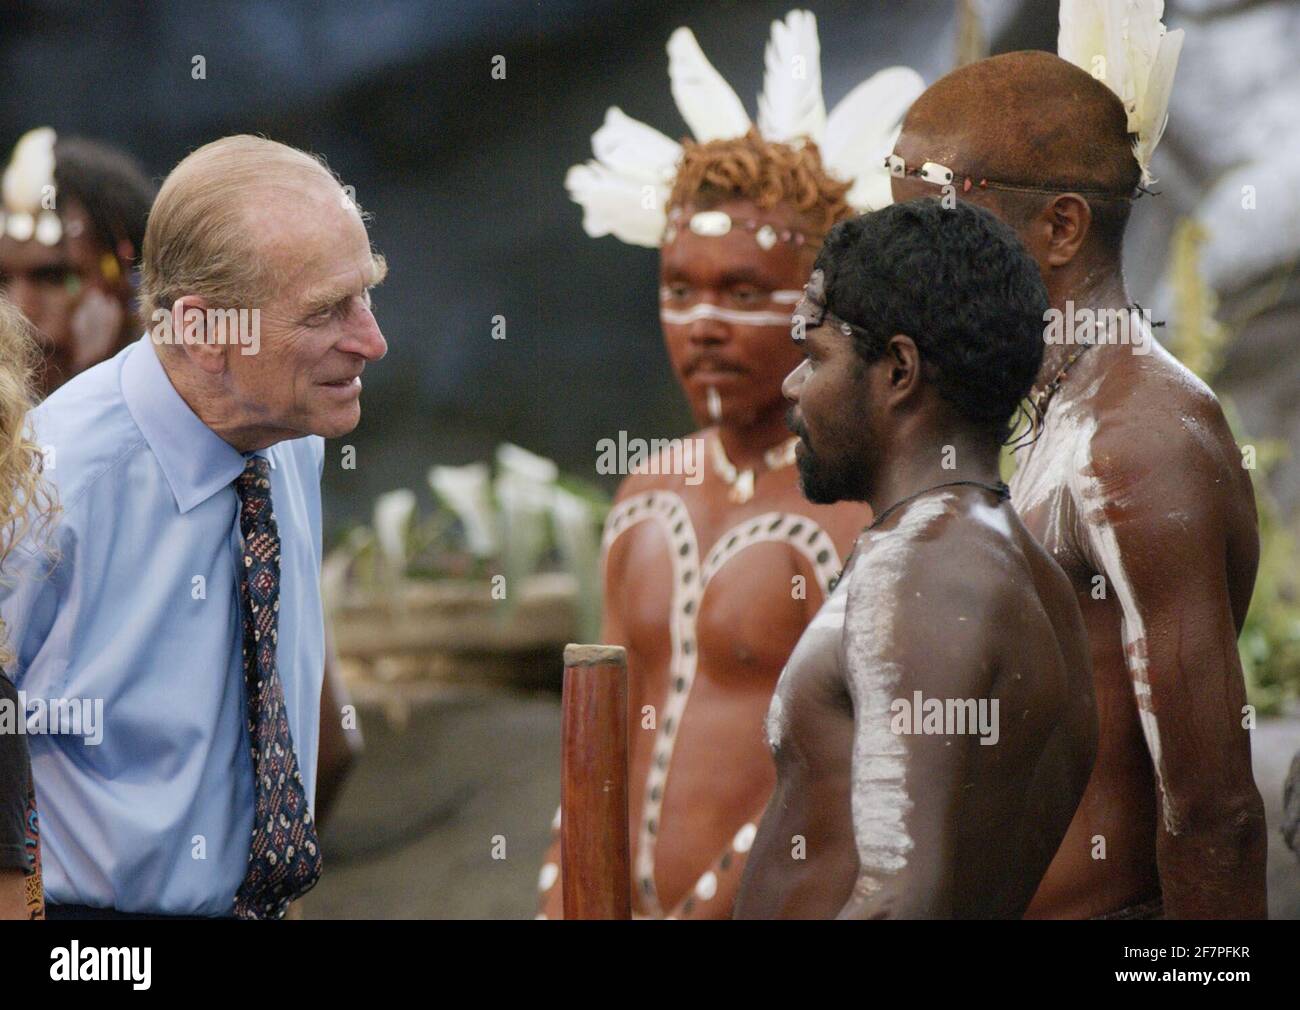 File photo dated 01/03/02 of The Duke of Edinburgh talking to Aboriginal performers after watching a culture show at Tjapukai Aboriginal Culture Park, Cairns, Queensland, Australia. The Duke surprised the aborigines when he asked them 'Do you still throw spears at each other?'. The Duke of Edinburgh was perhaps best known for his gaffes. He shocked and sometimes delighted the public with his outspoken remarks and clangers. Issue date: Friday April 4, 2021. Stock Photo